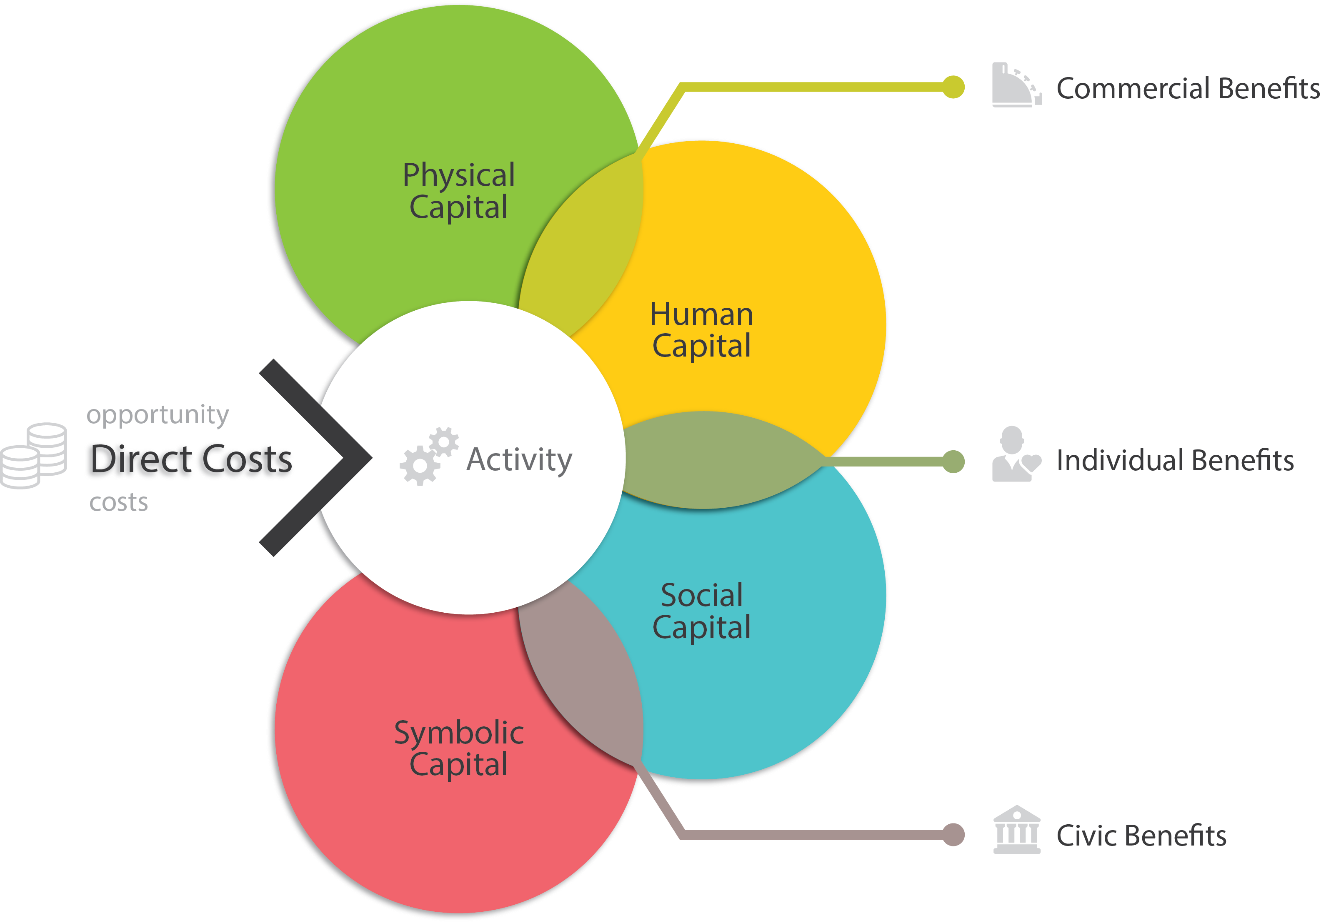 the framework uses bubbles to indicate how activities with direct costs relate, such as physical capital and human capital resulting in commercial benefits, human capital and social capital resulting in individual benefits and social and symbolic capital resulting in civic benefits.